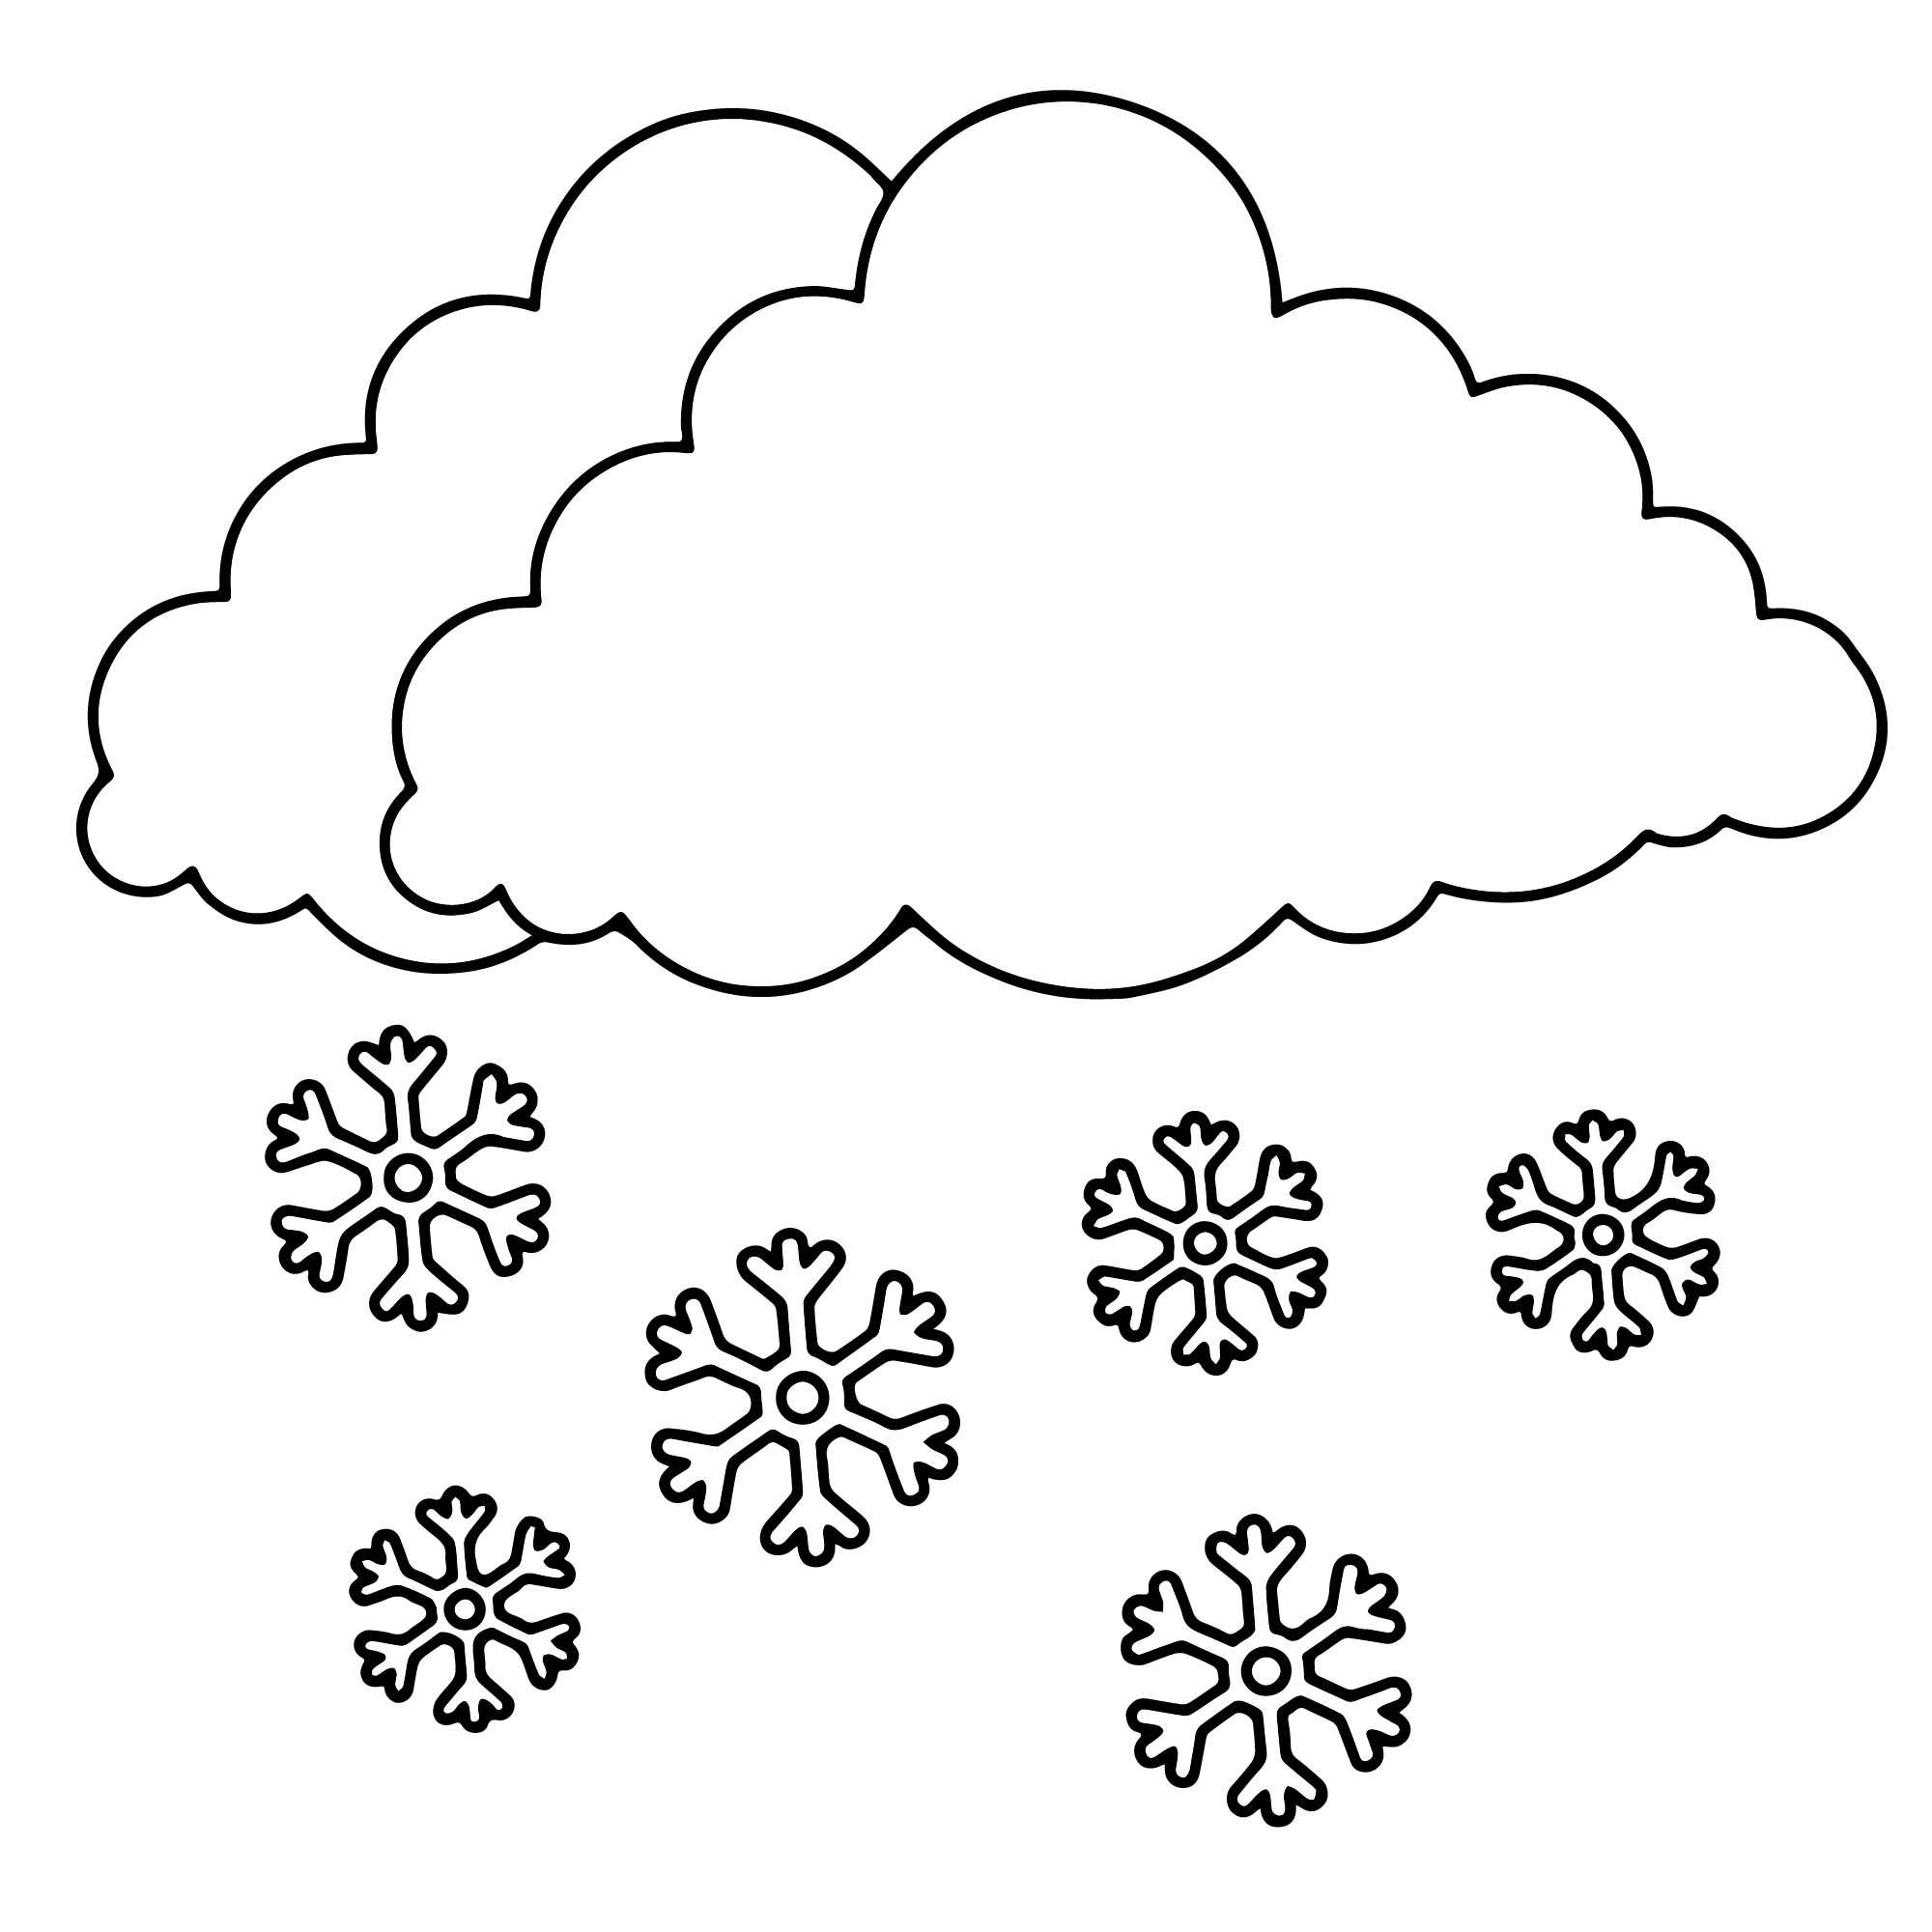 Coloring book glorious snowfall for students